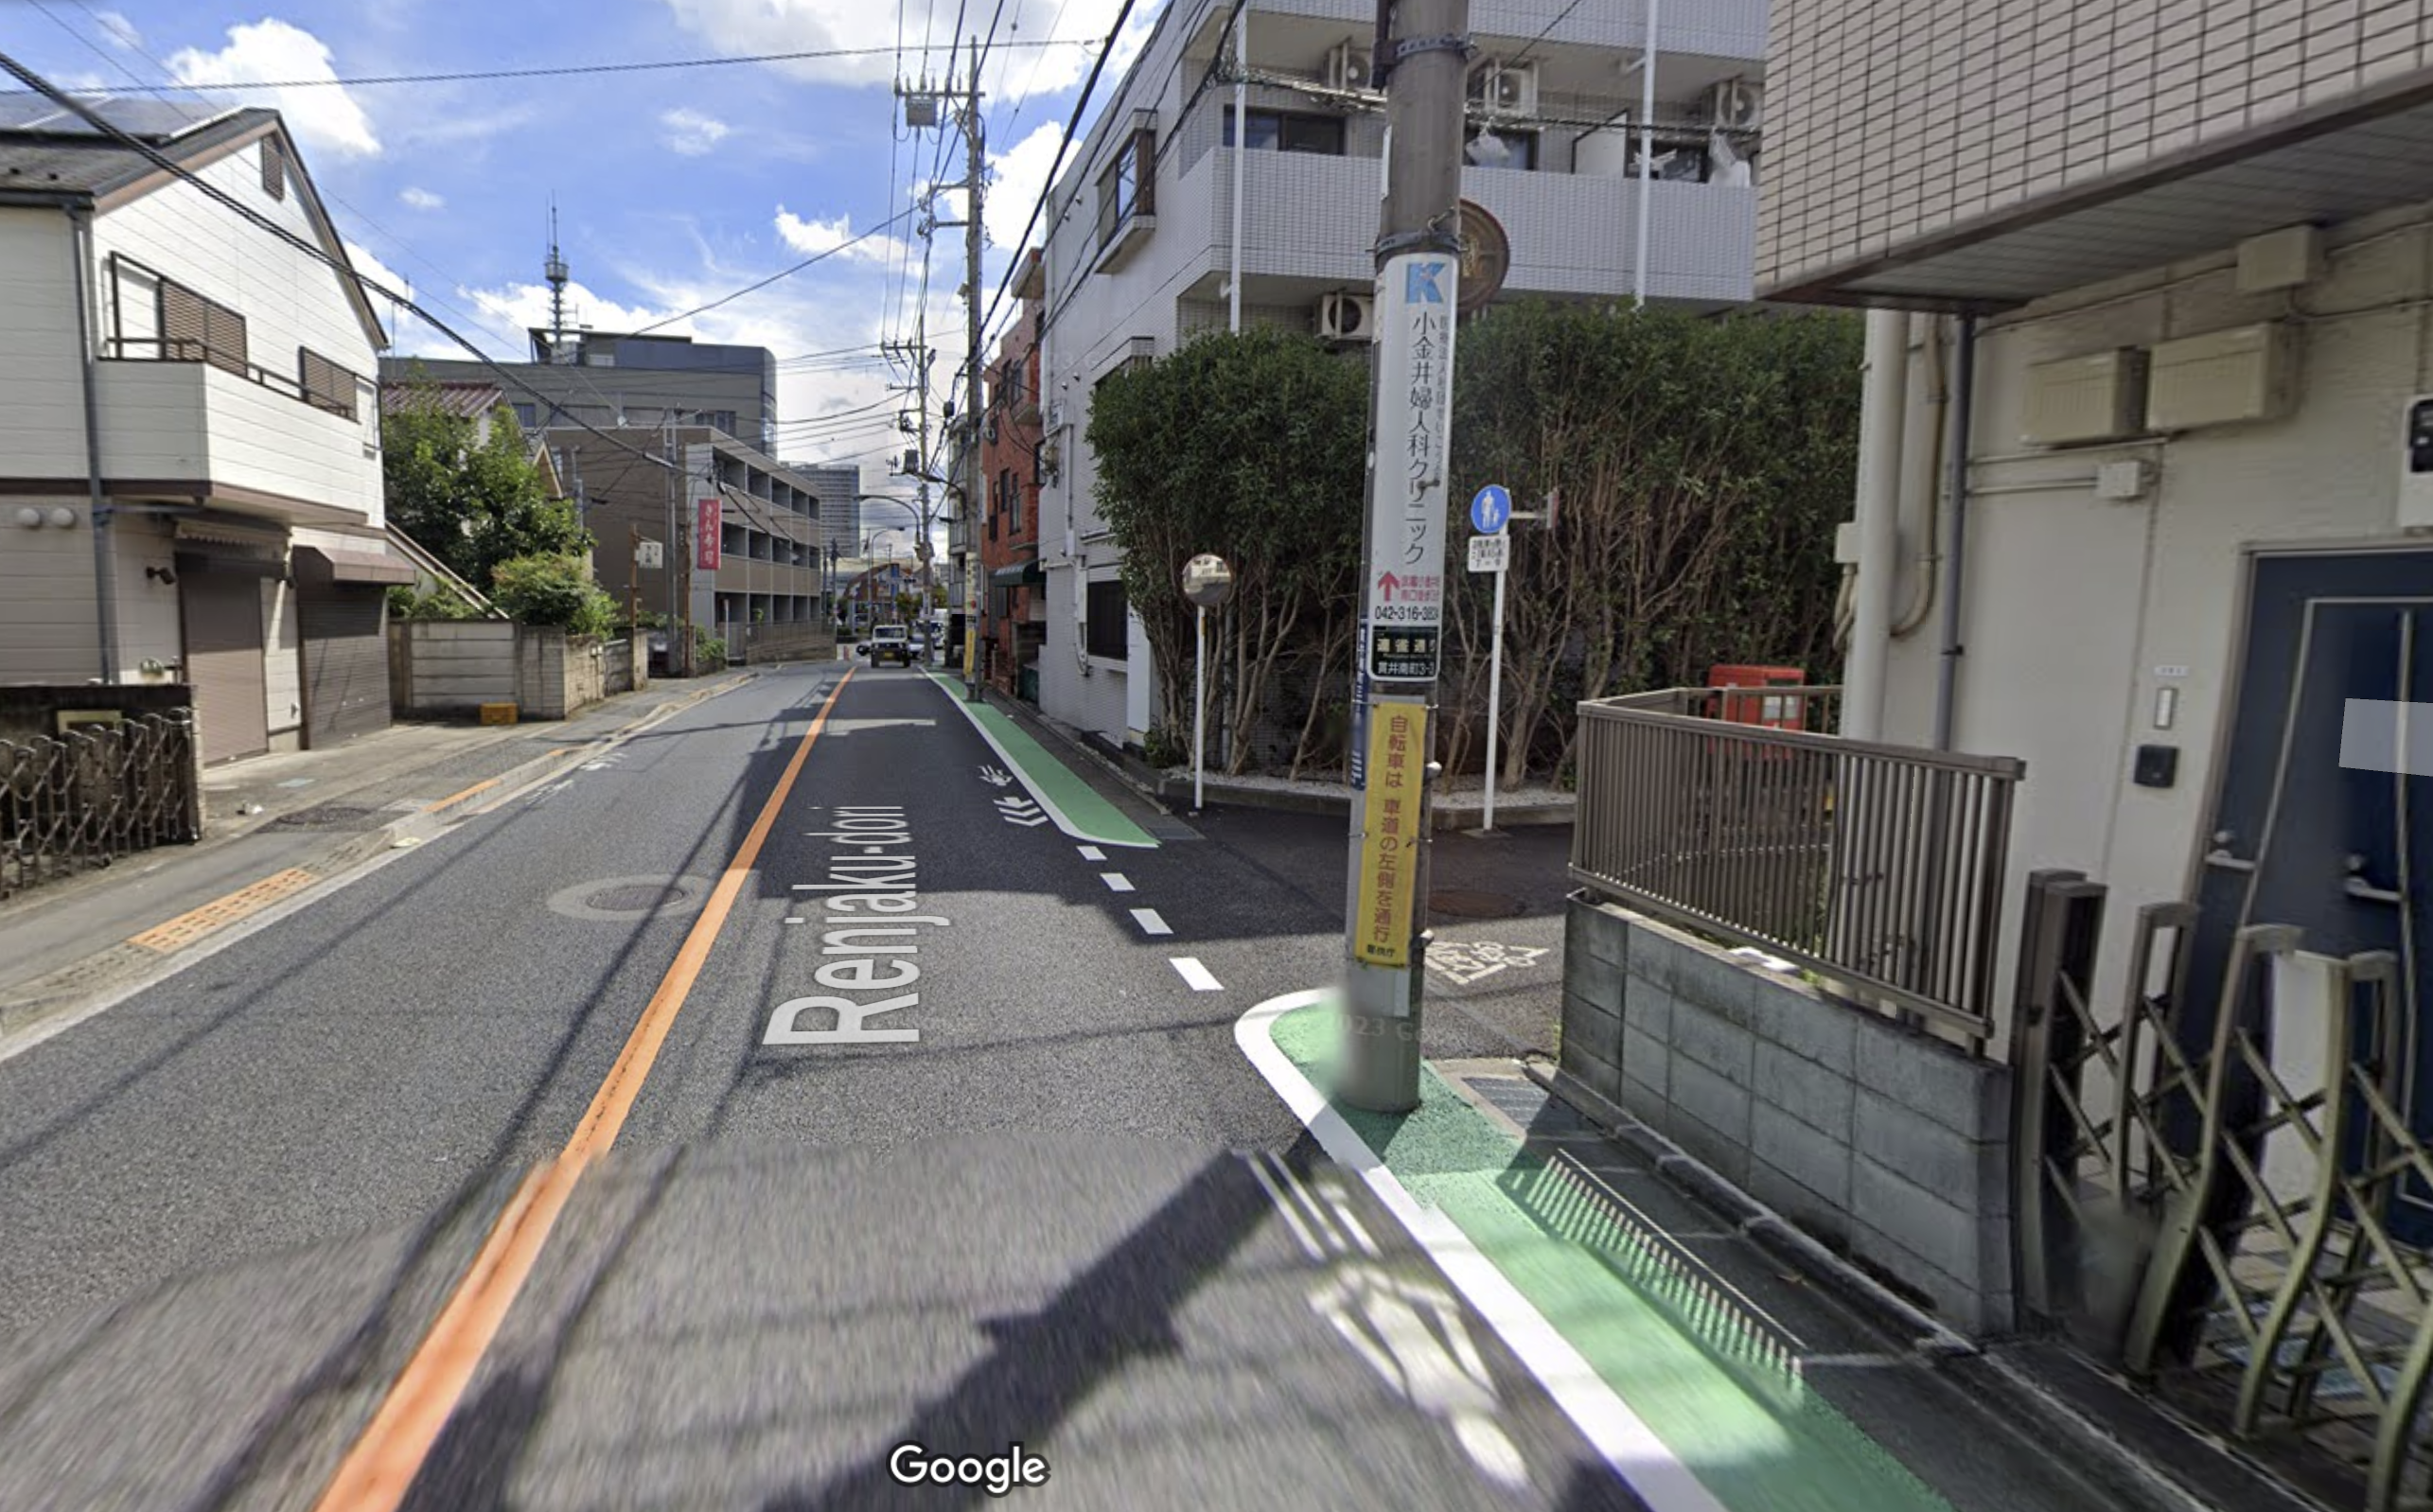 We found a cheap land in the street on the right of this Street View photo, but that green death-zone was an immediate no from us